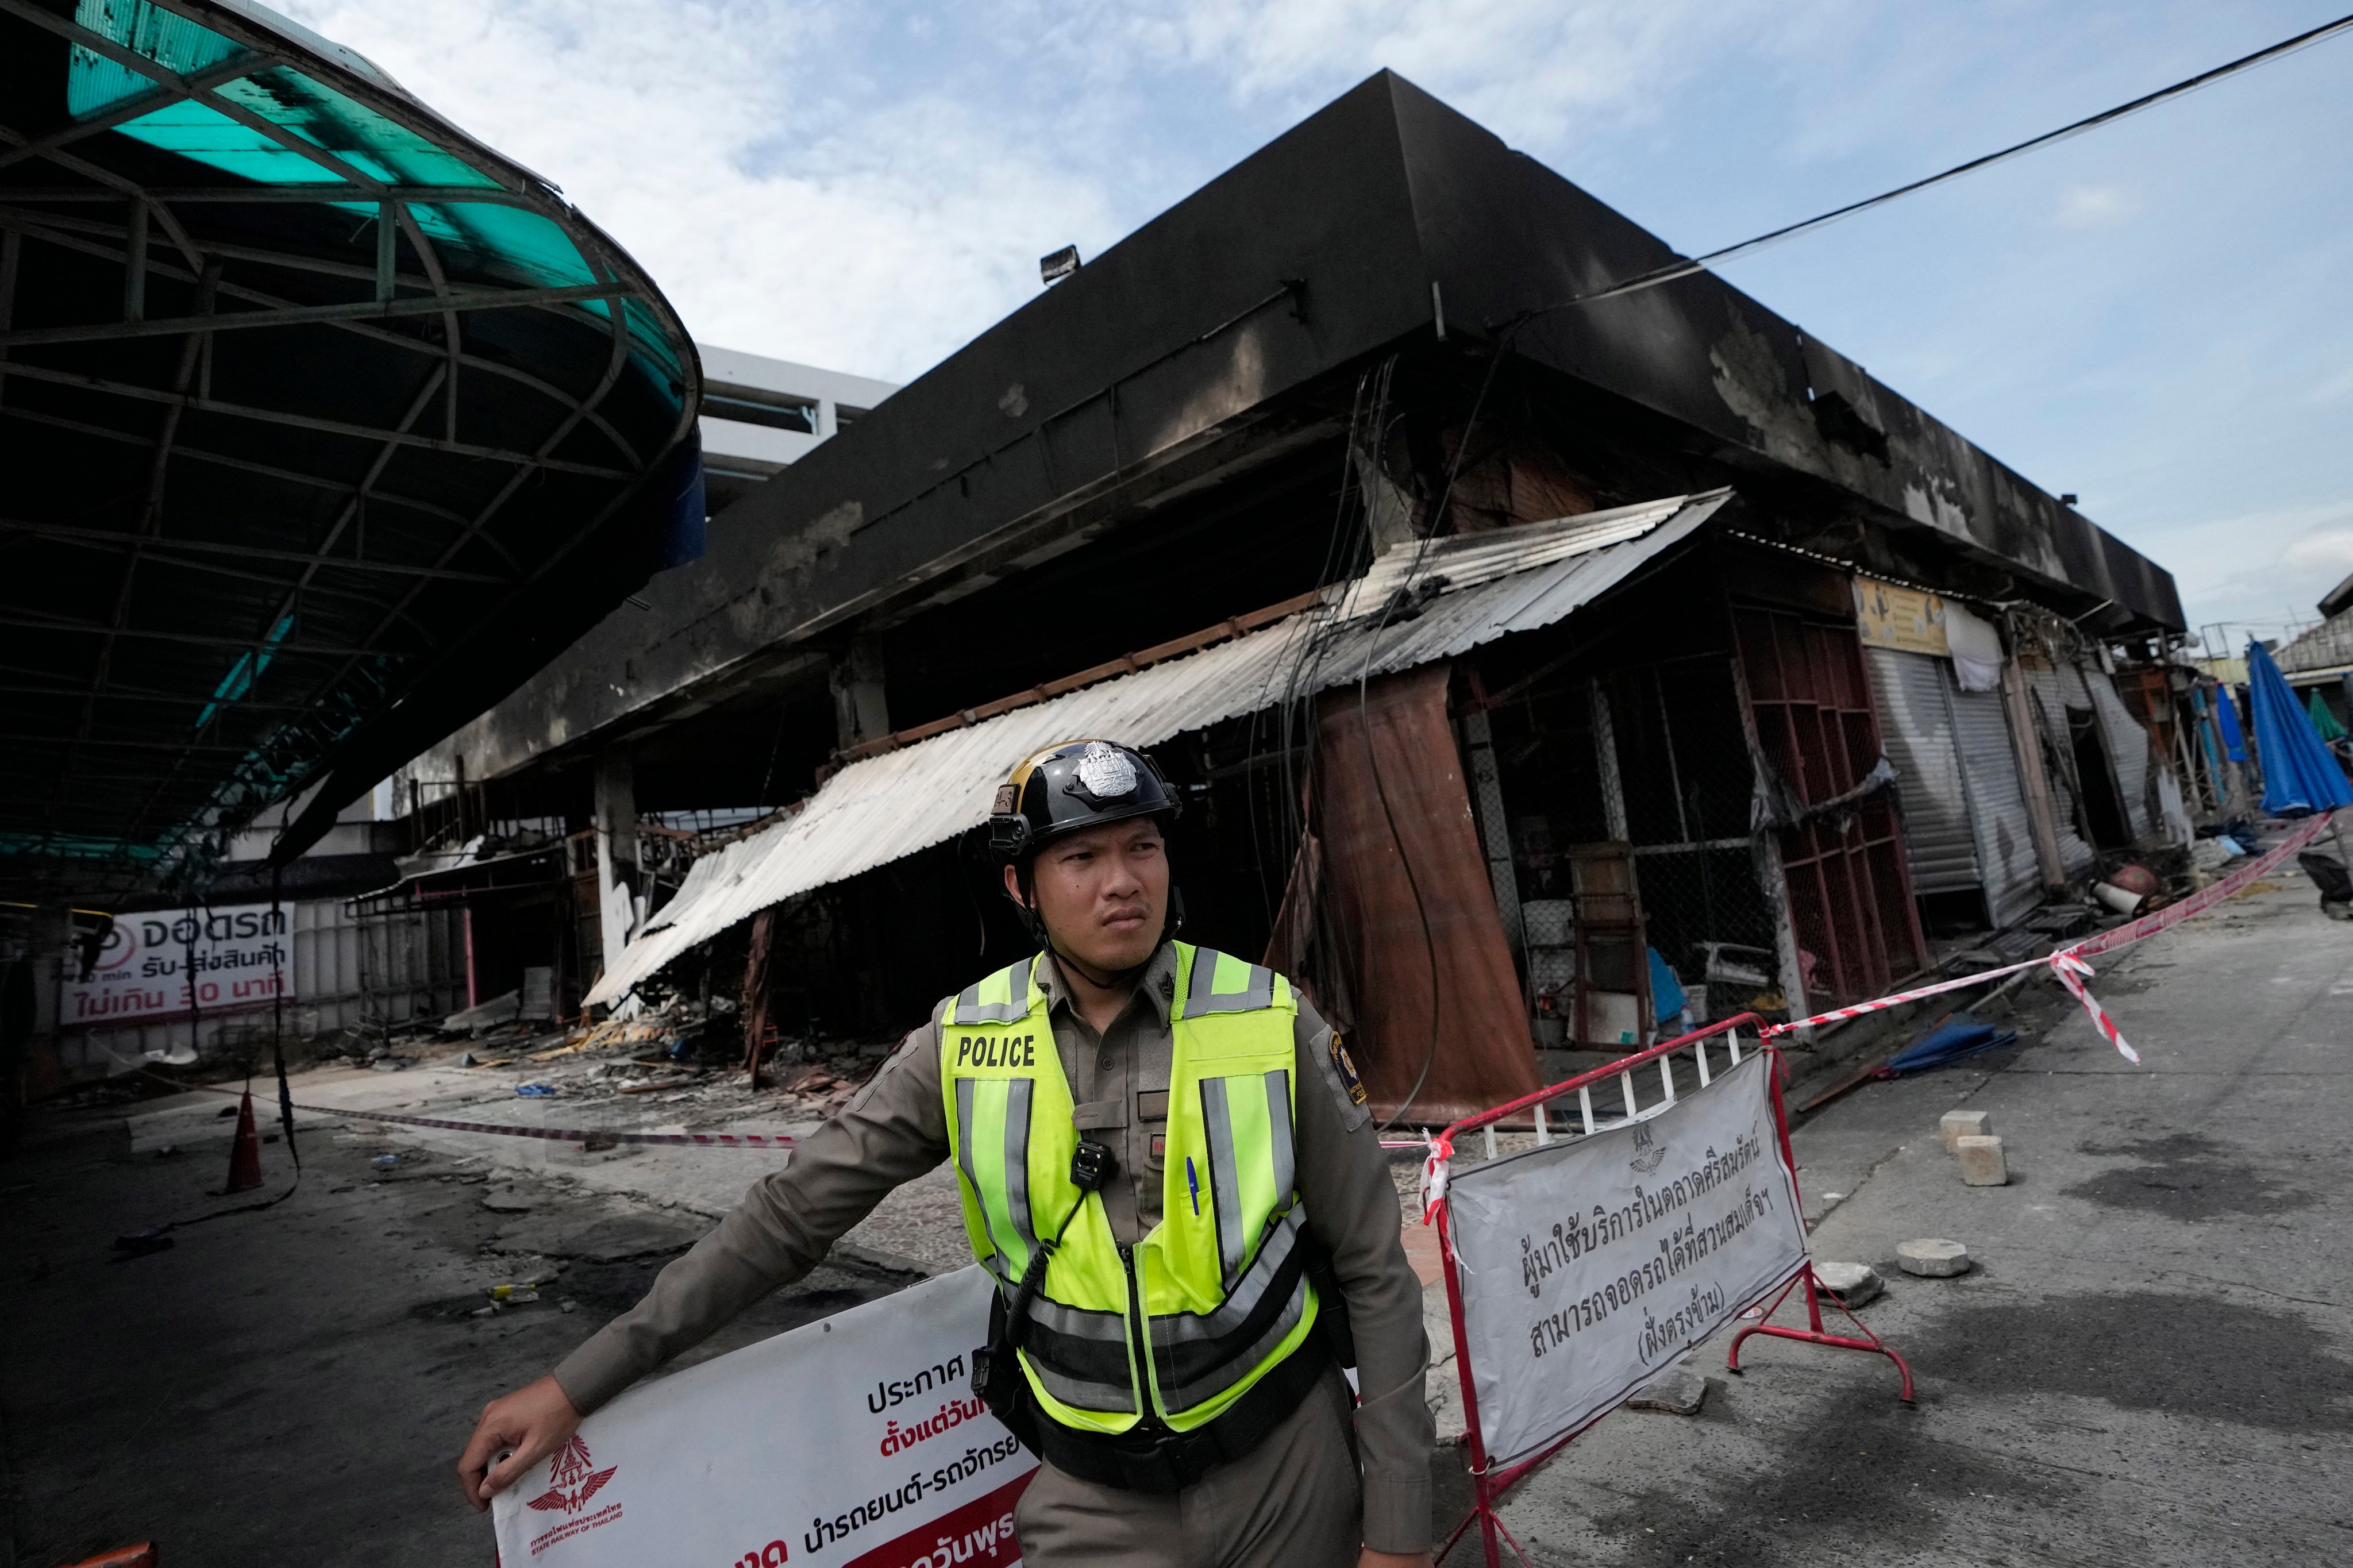 A Thai officer stands by the pet zone area after a fire at Chatuchak Weekend Market, one of the most famous markets in Bangkok, on Tuesday. Photo: AP